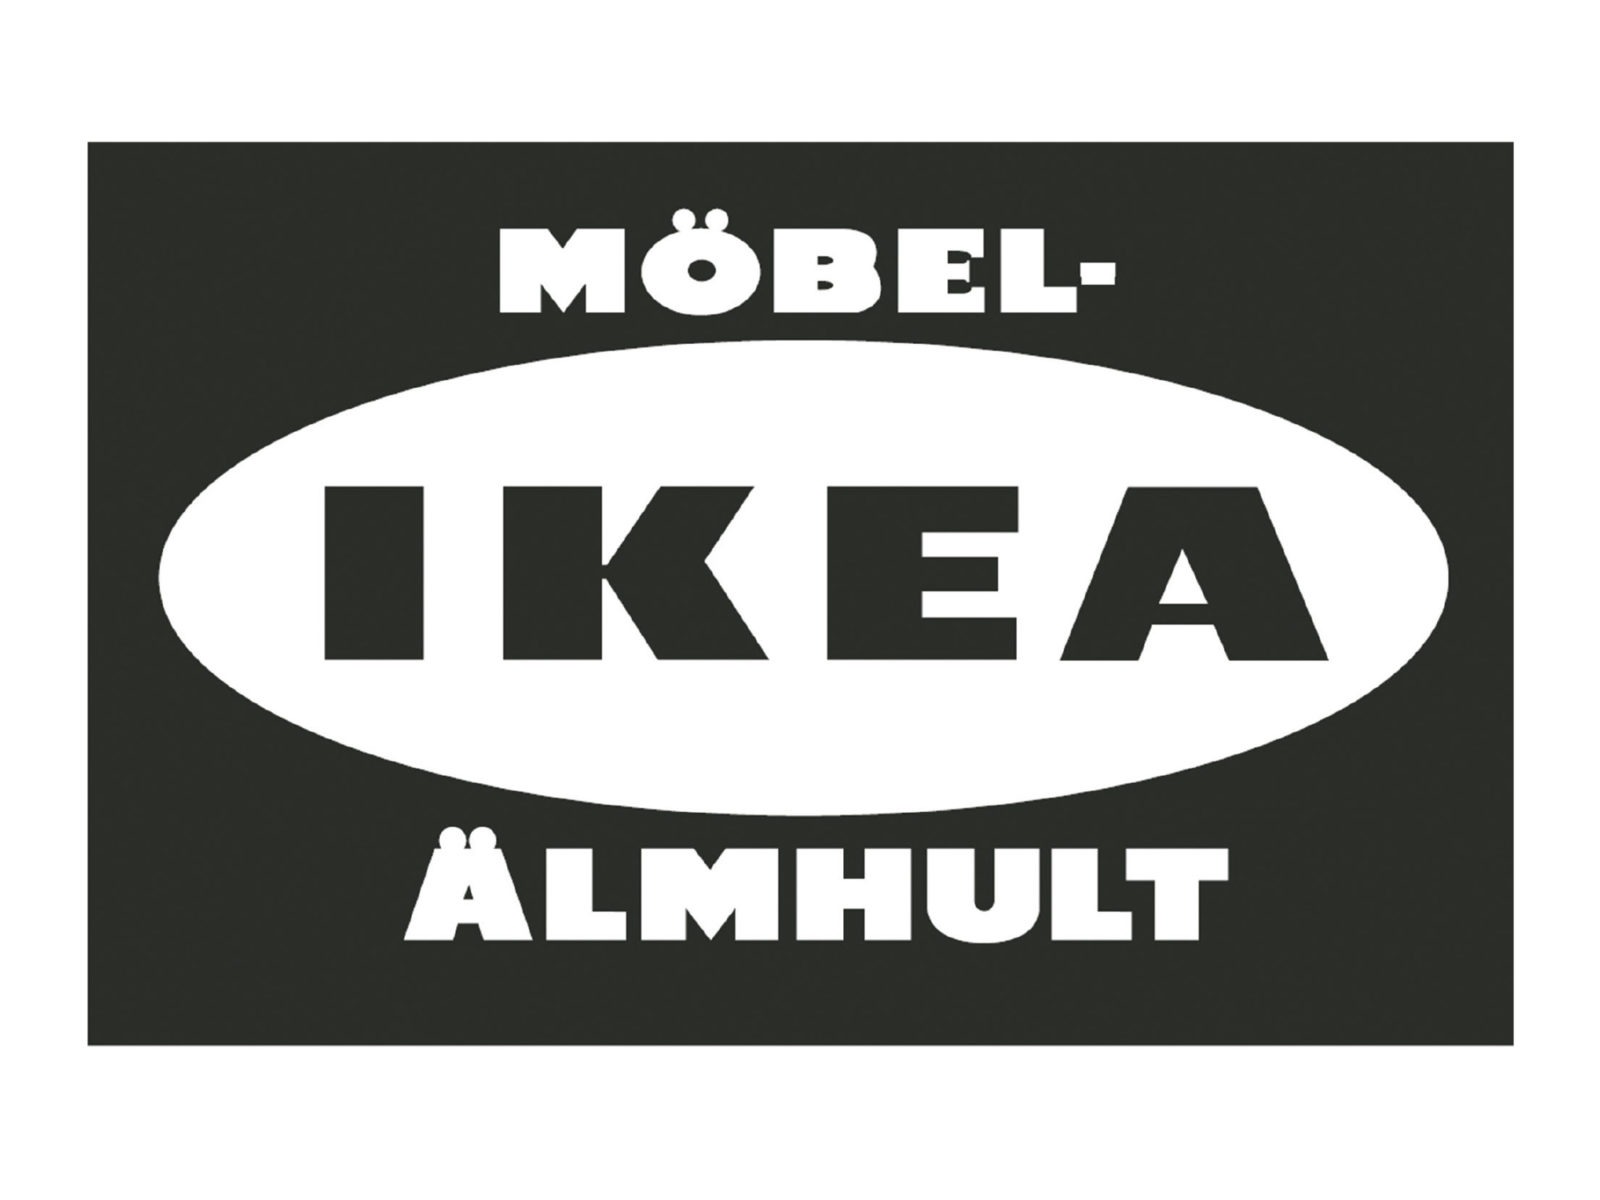 IKEA in black capital letters on white oval on black background. Text above oval says MÖBEL- and text below says ÄLMHULT.